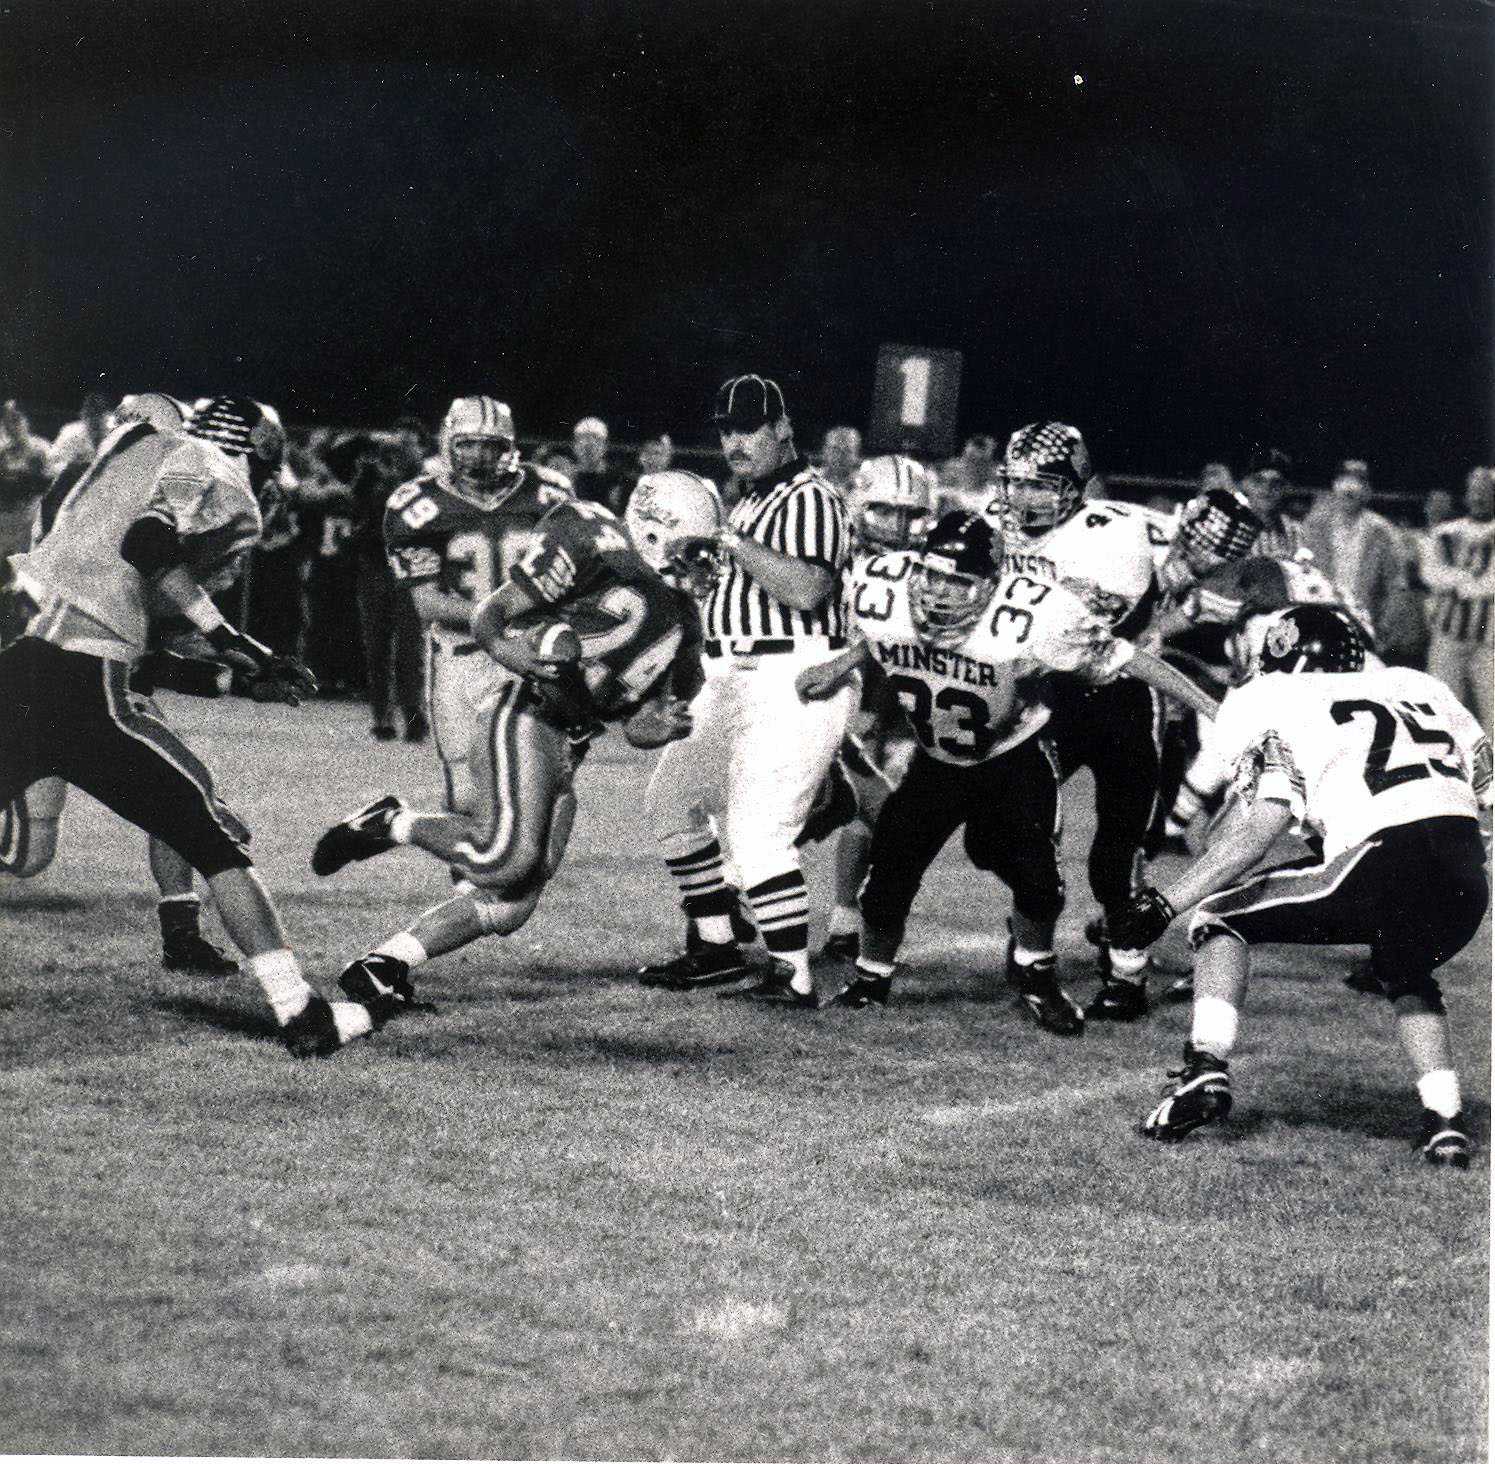 Photo taken from Mr.Wennings high school football game (number 24).